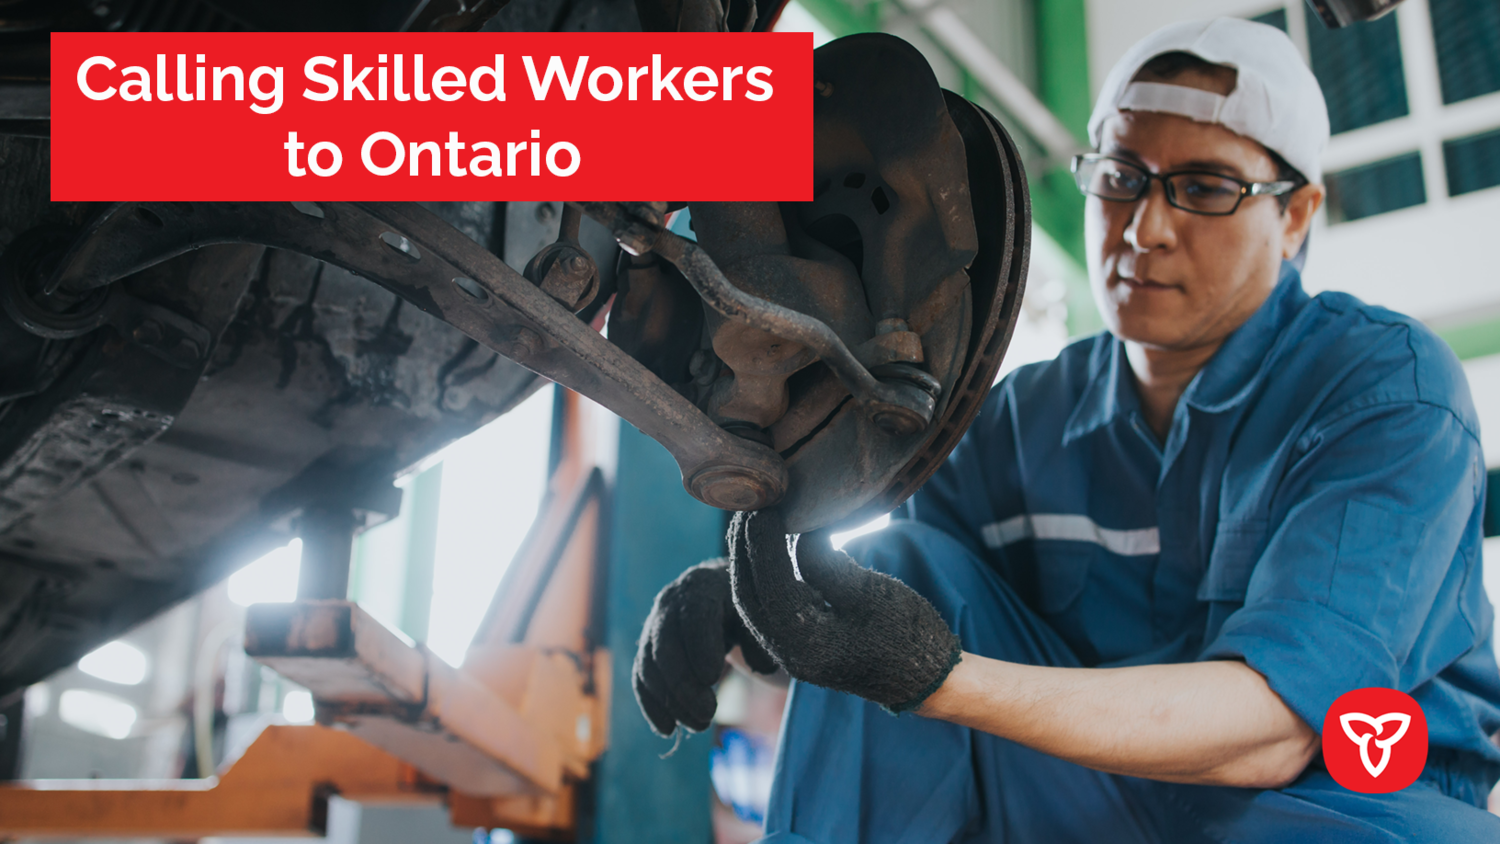 Removing Barriers for Out-of-Province Skilled Workers